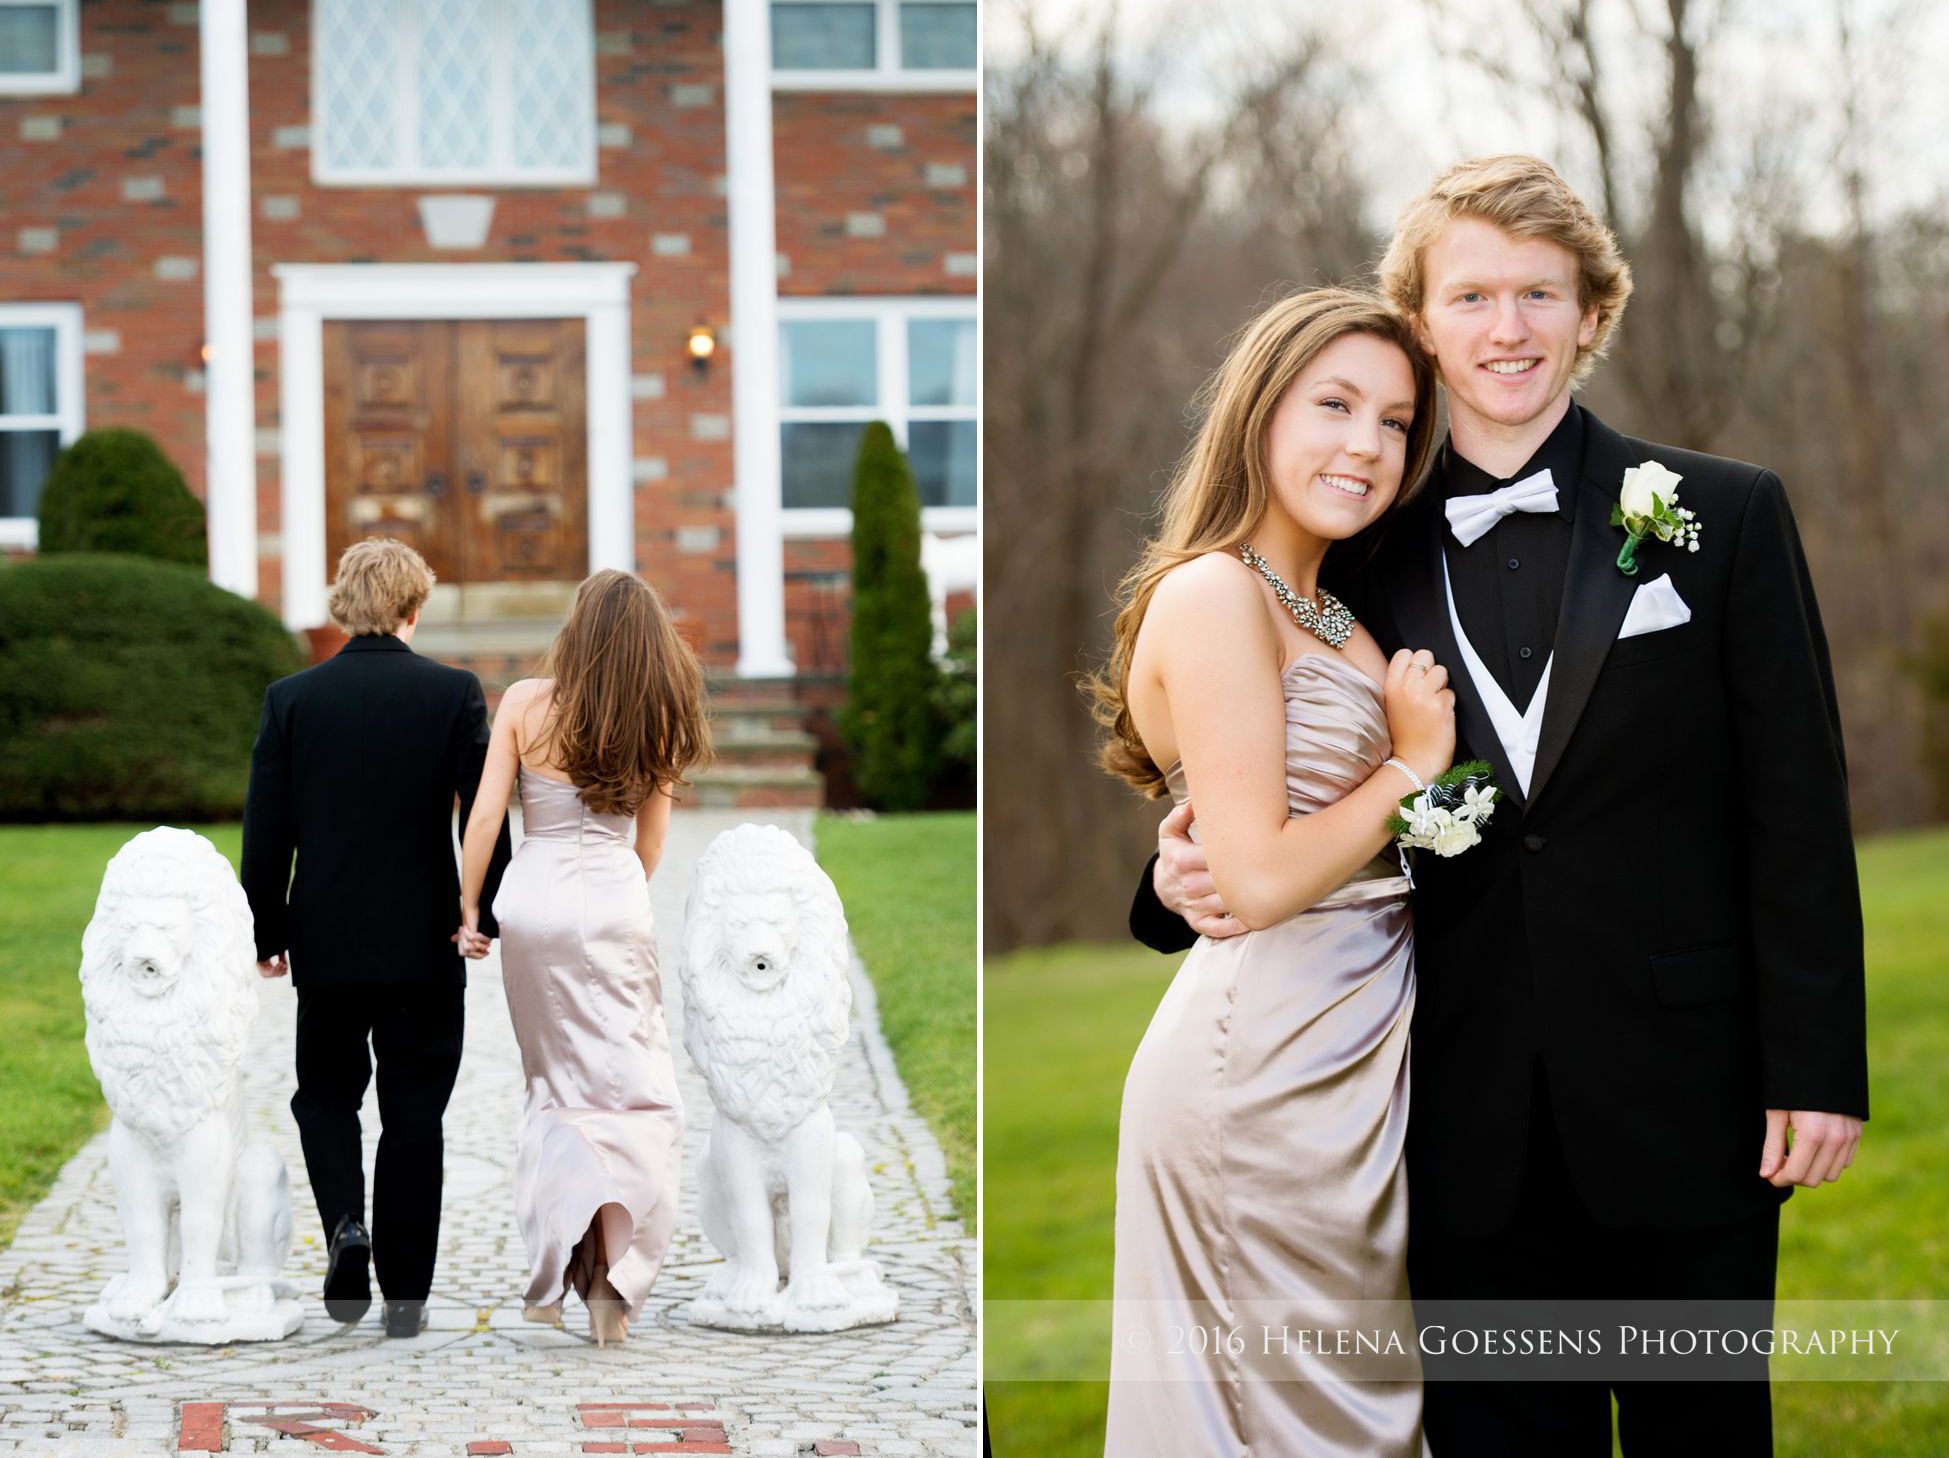 Prom 2016 Couple of a senior girl wearing a beige dress and a senior boy in a black tuxedo